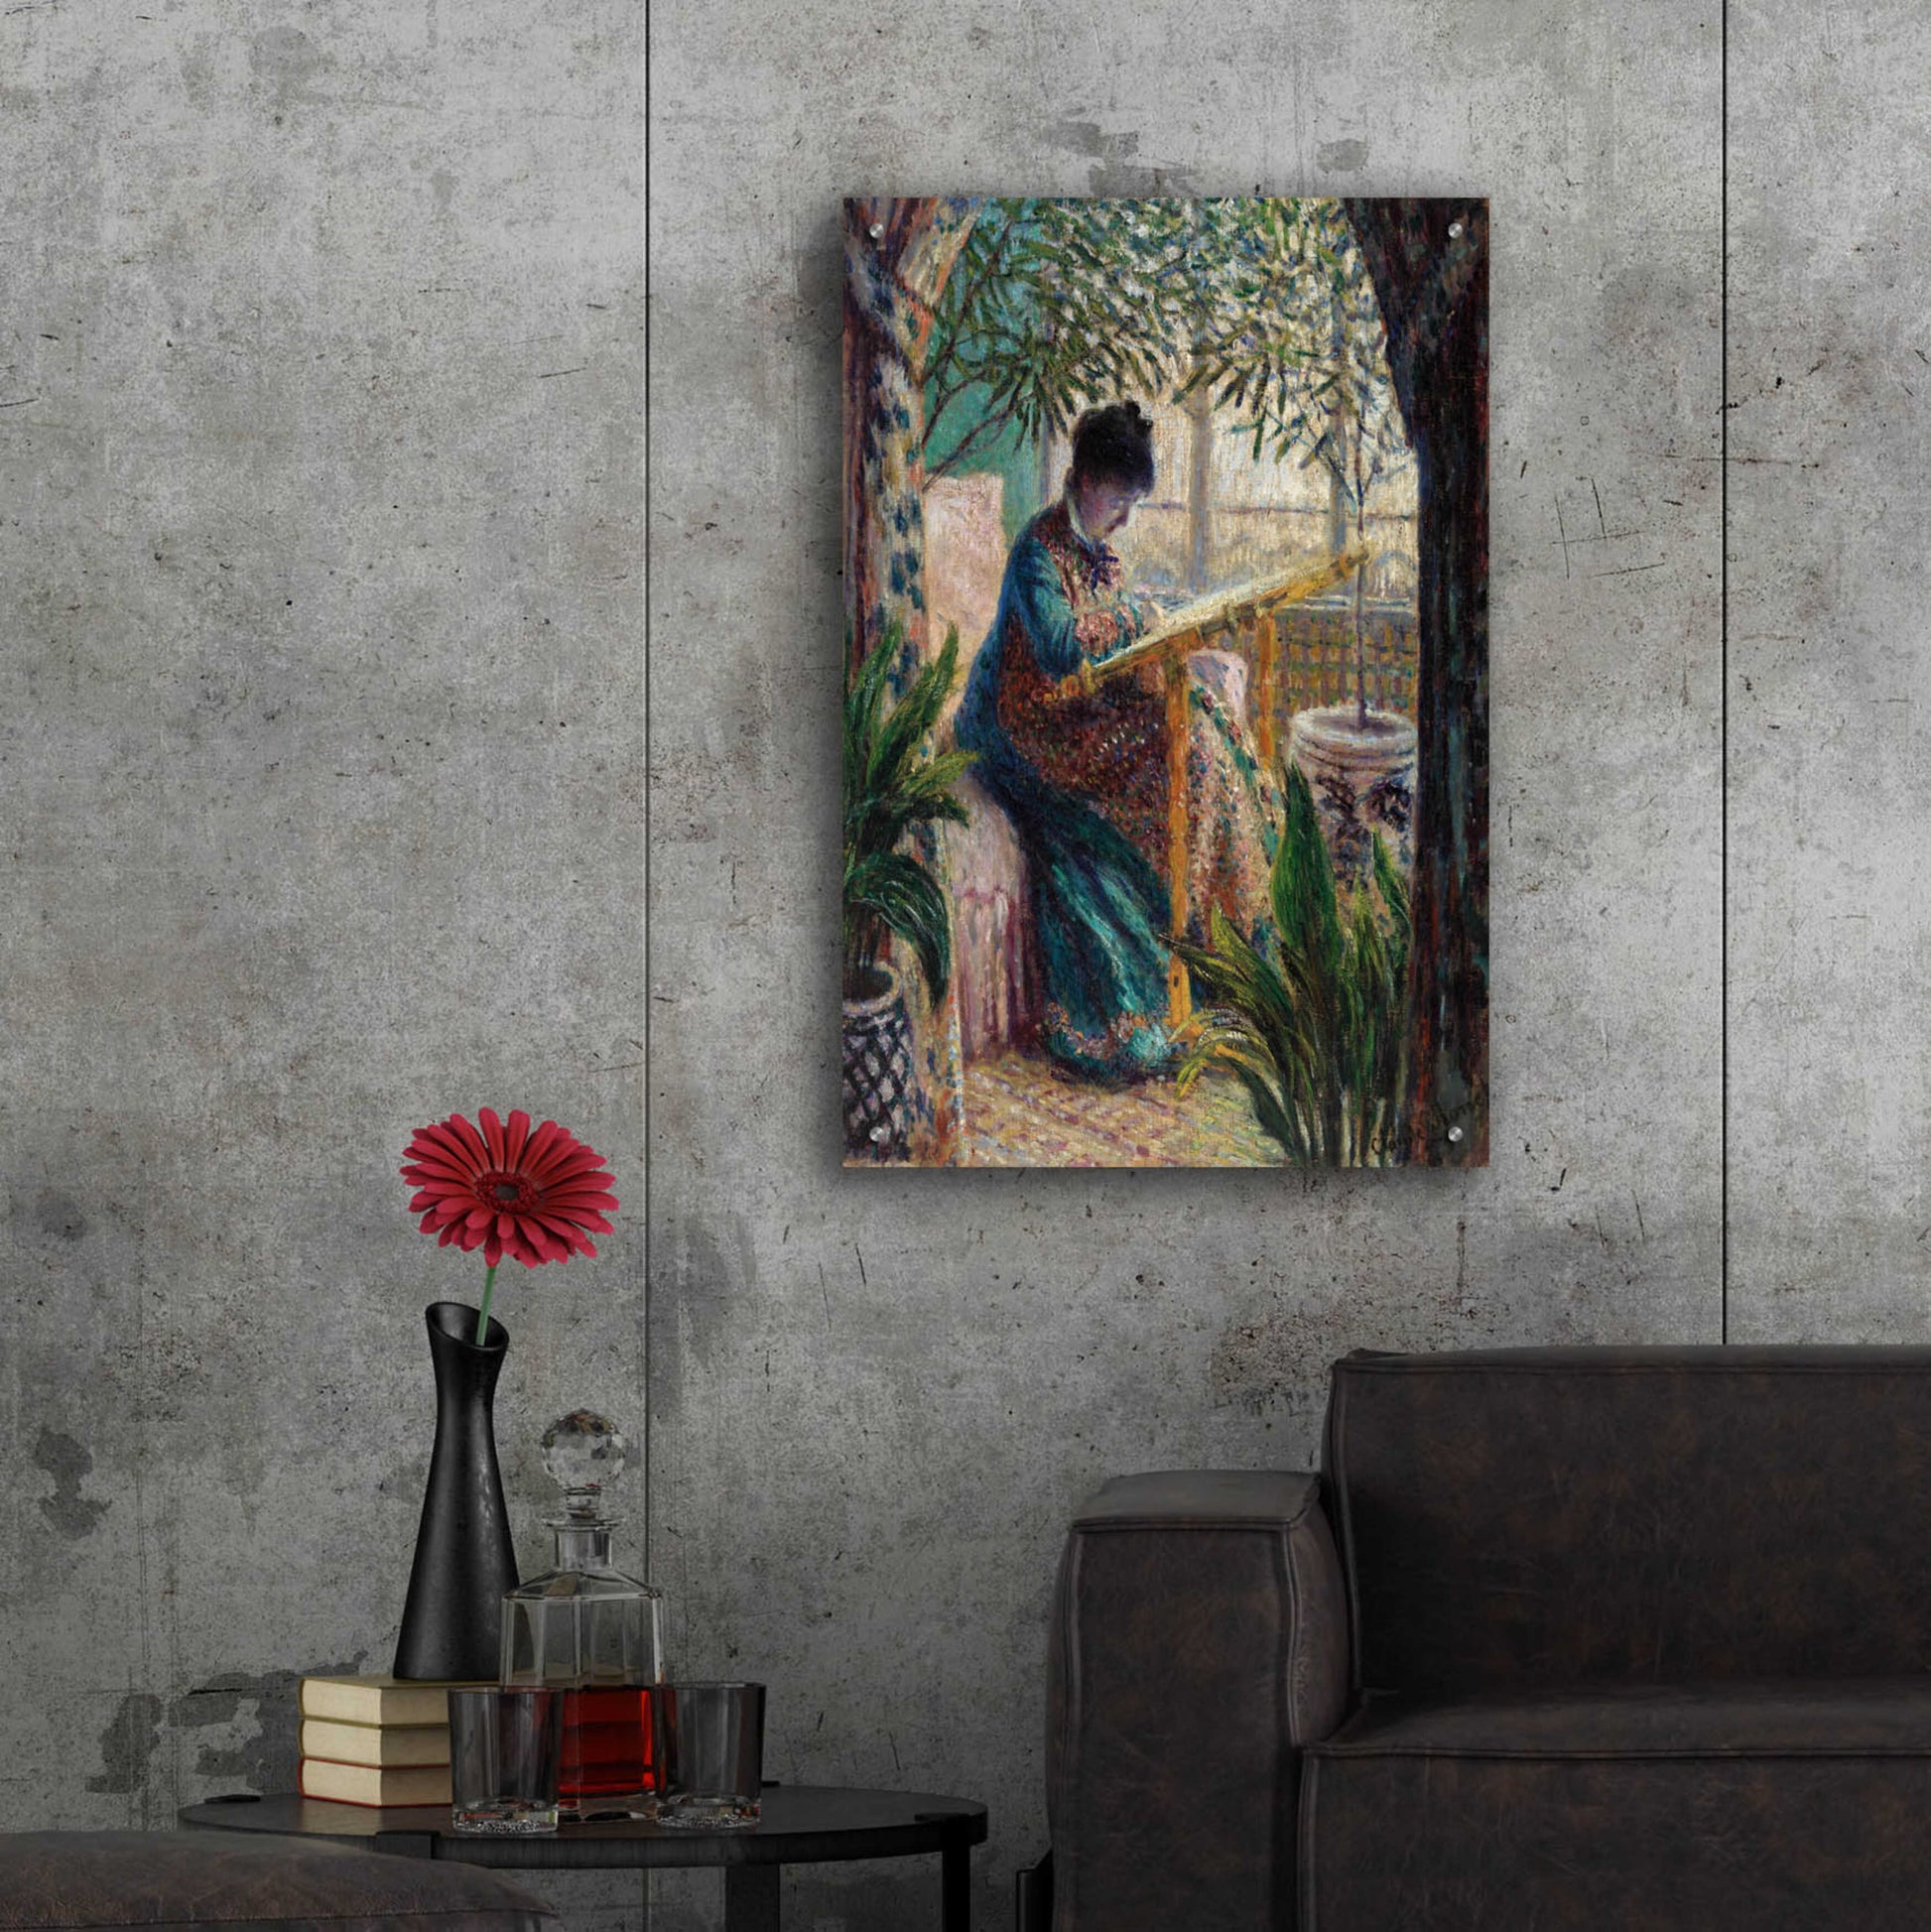 Epic Art 'Madame Monet Embroidering' by Claude Monet, Acrylic Glass Wall Art,24x36